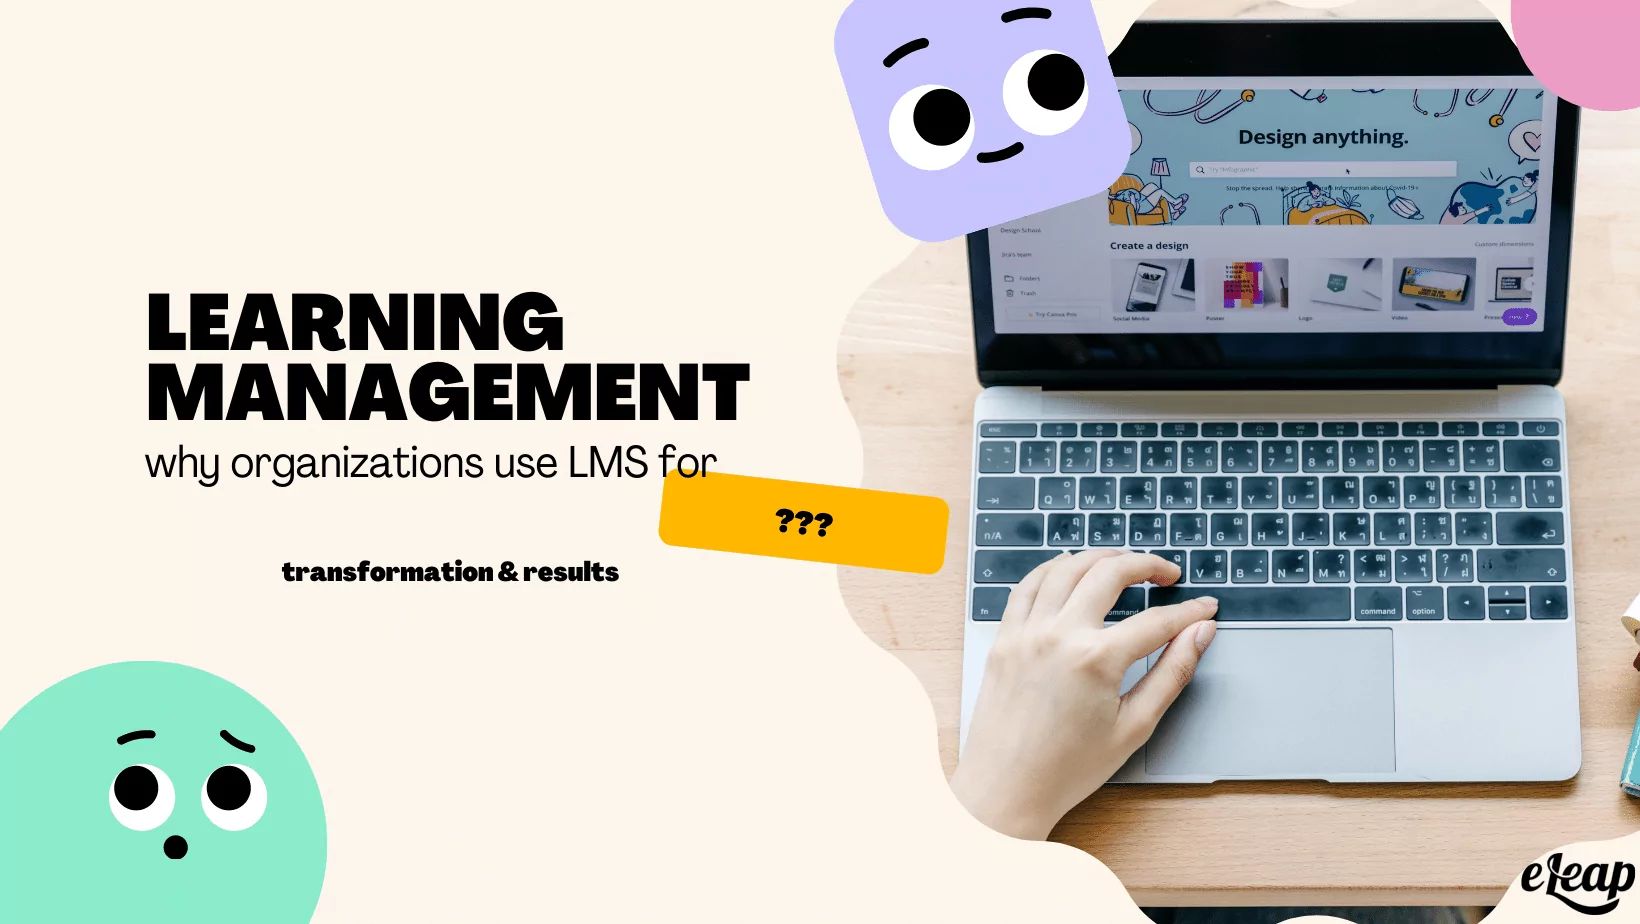 LMS Platforms Provide Organizations With Actionable Learning Management Results – LMS